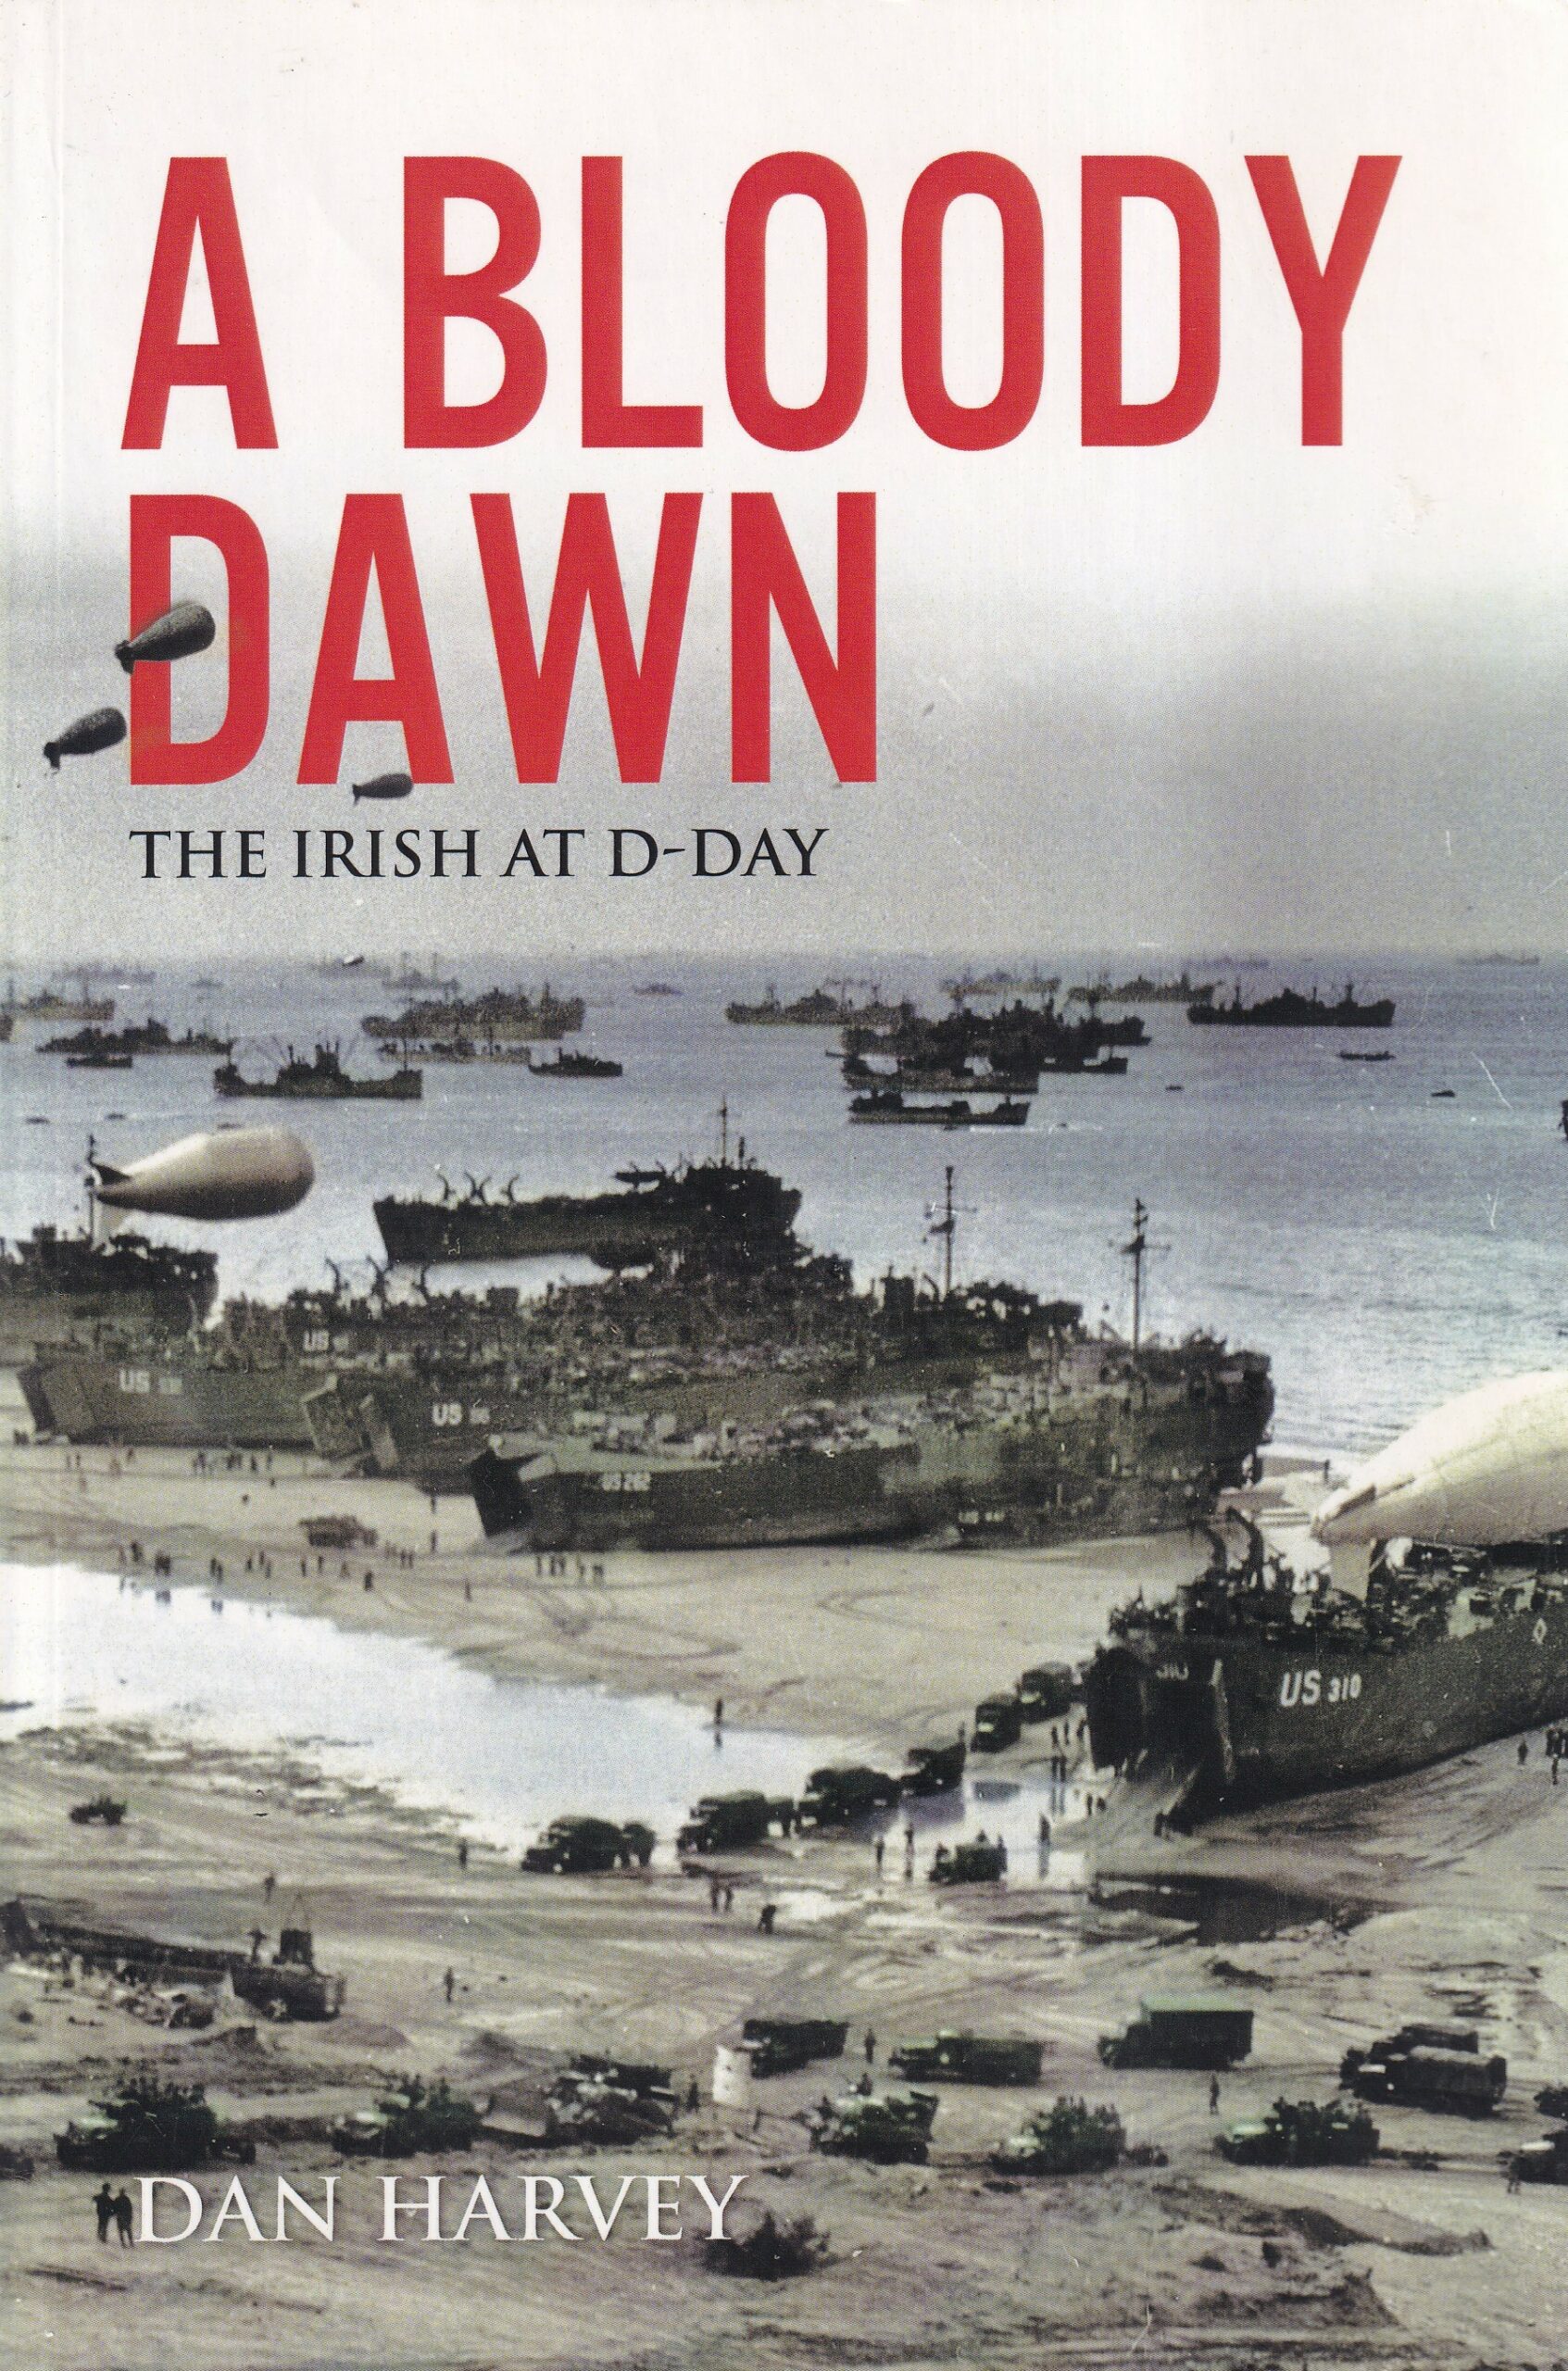 A Bloody Dawn: The Irish at D-Day by Dan Harvey